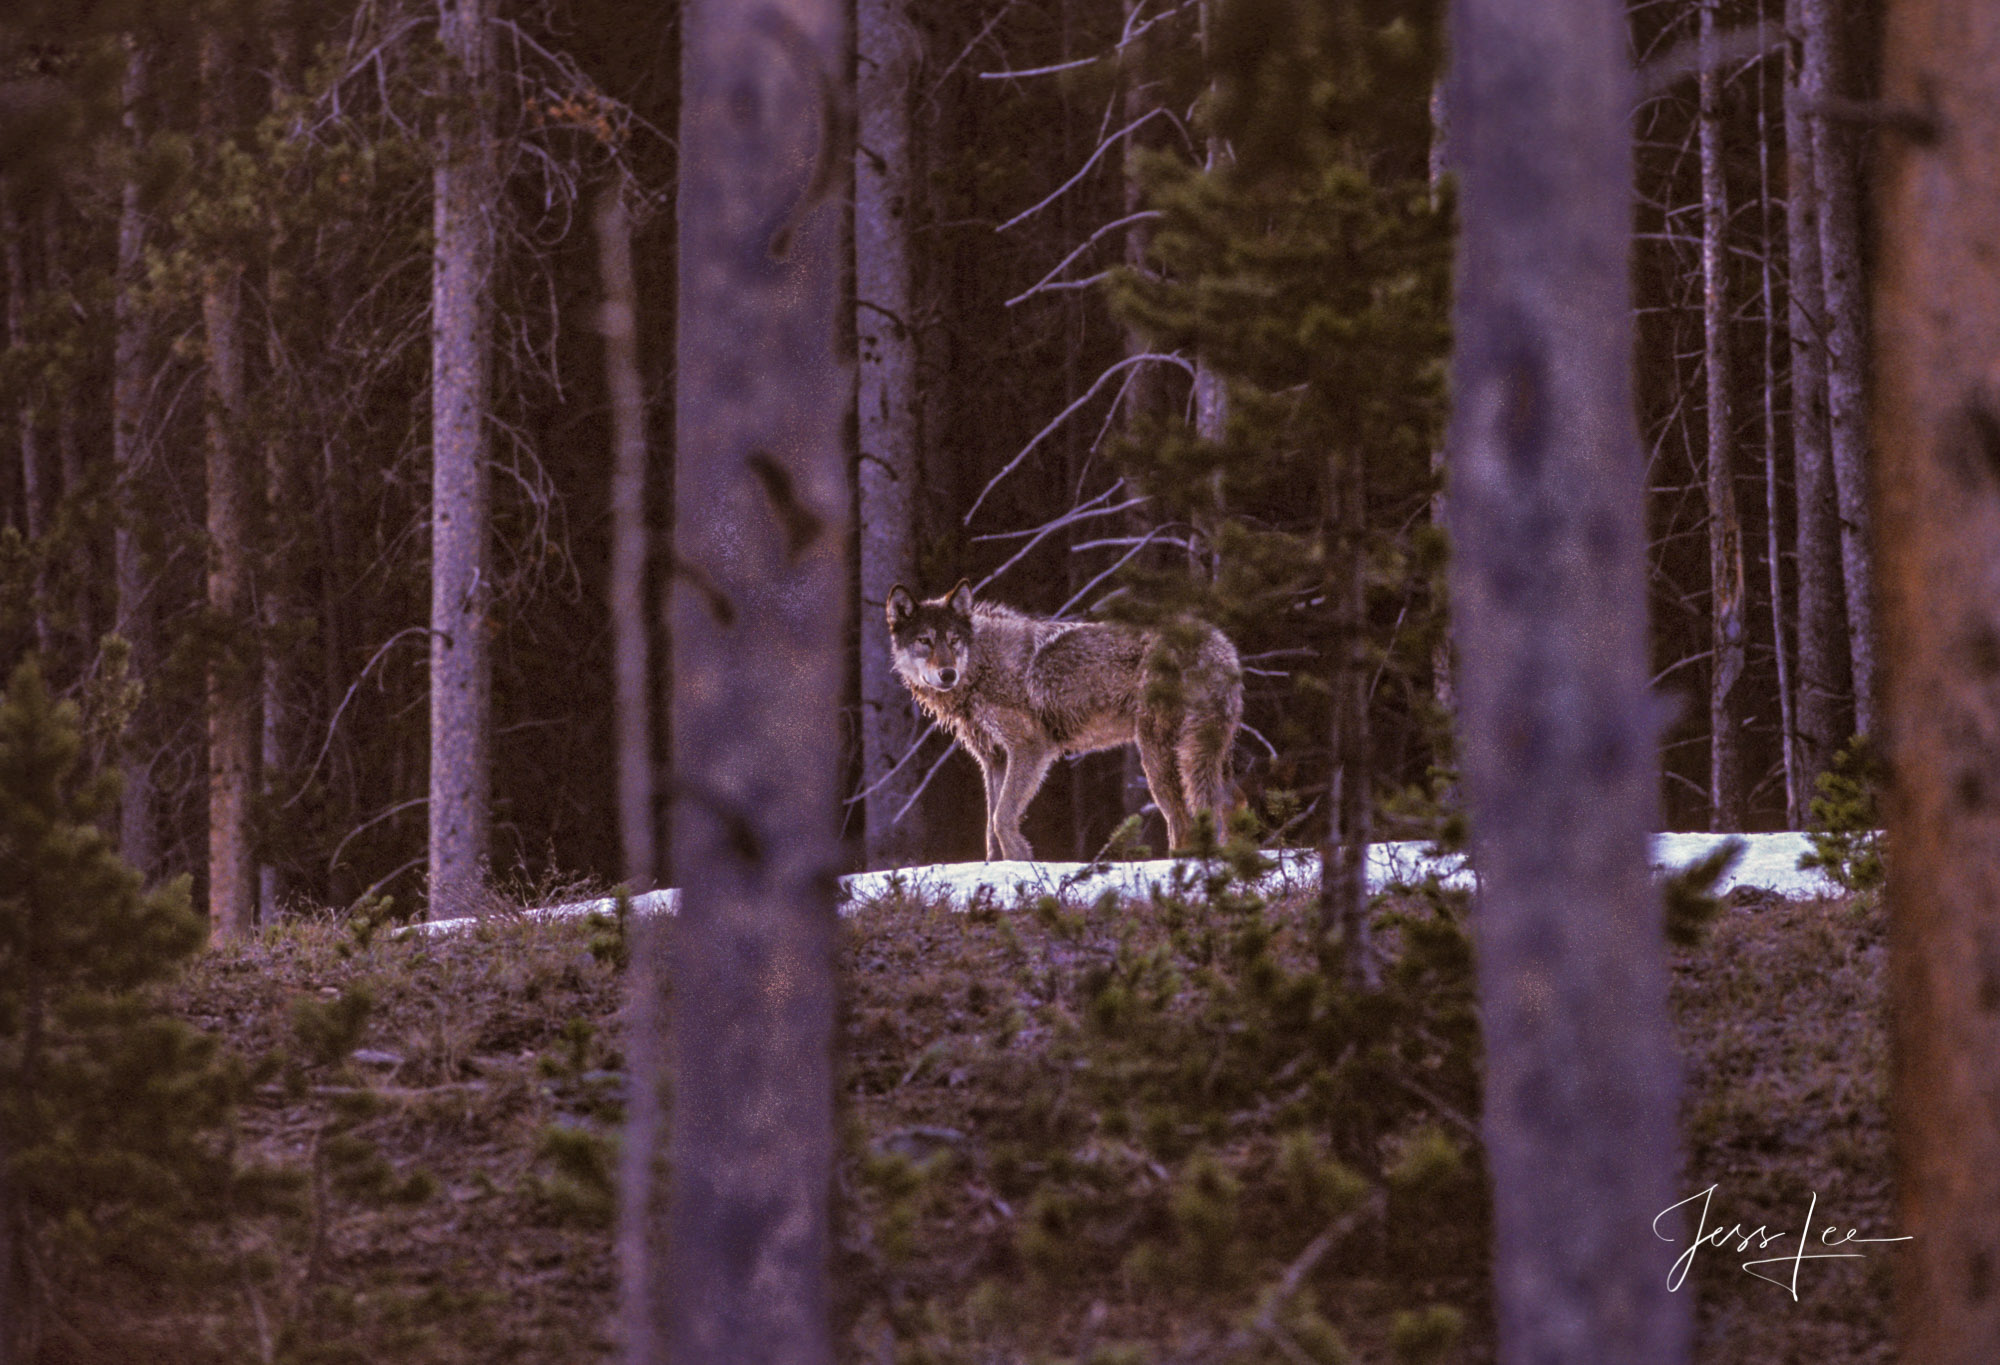 Yellowstone Wolf in the Wilderness of the lodgepole forrest near the Madison River. Exclusive limited edition photo of 200 prints...